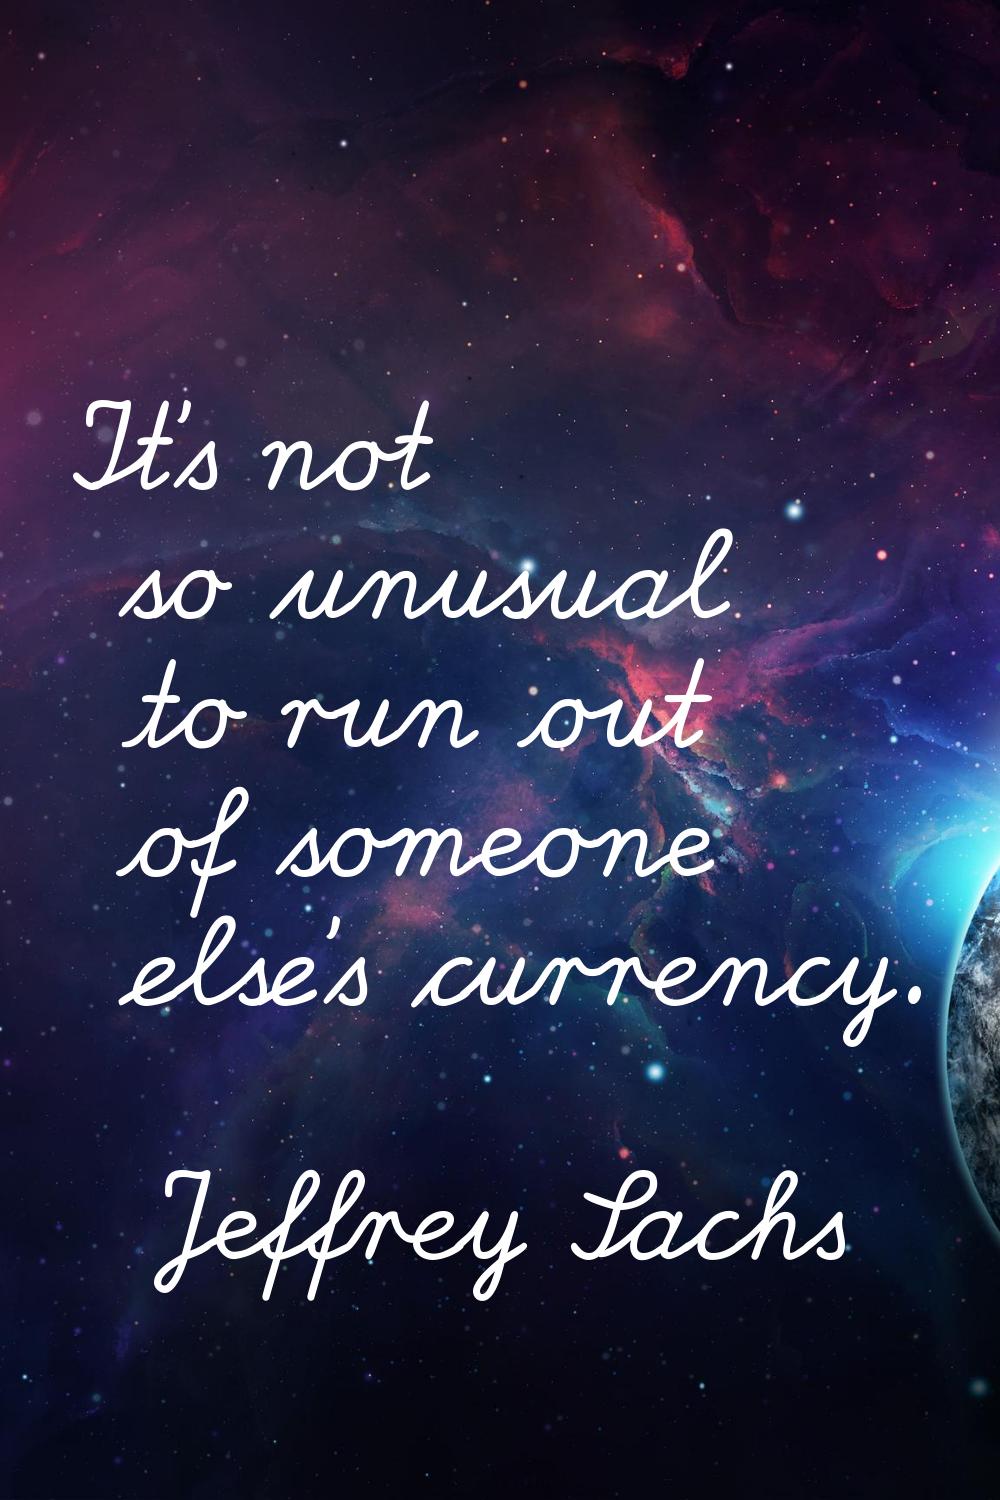 It's not so unusual to run out of someone else's currency.